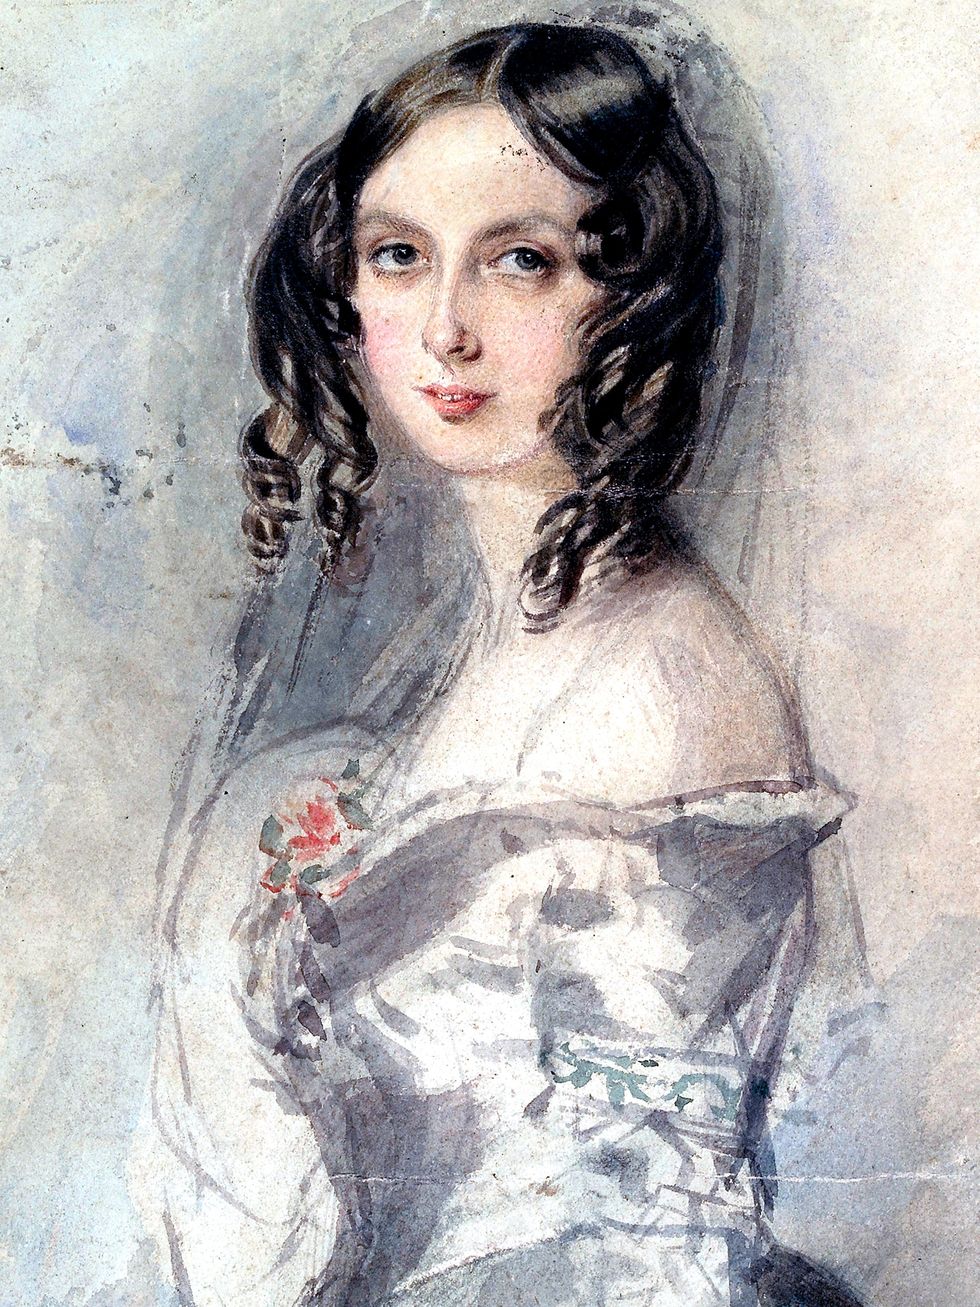 A watercolor portrait of the British mathematician Ada Lovelace shows a young woman with dark curls in a white dress.